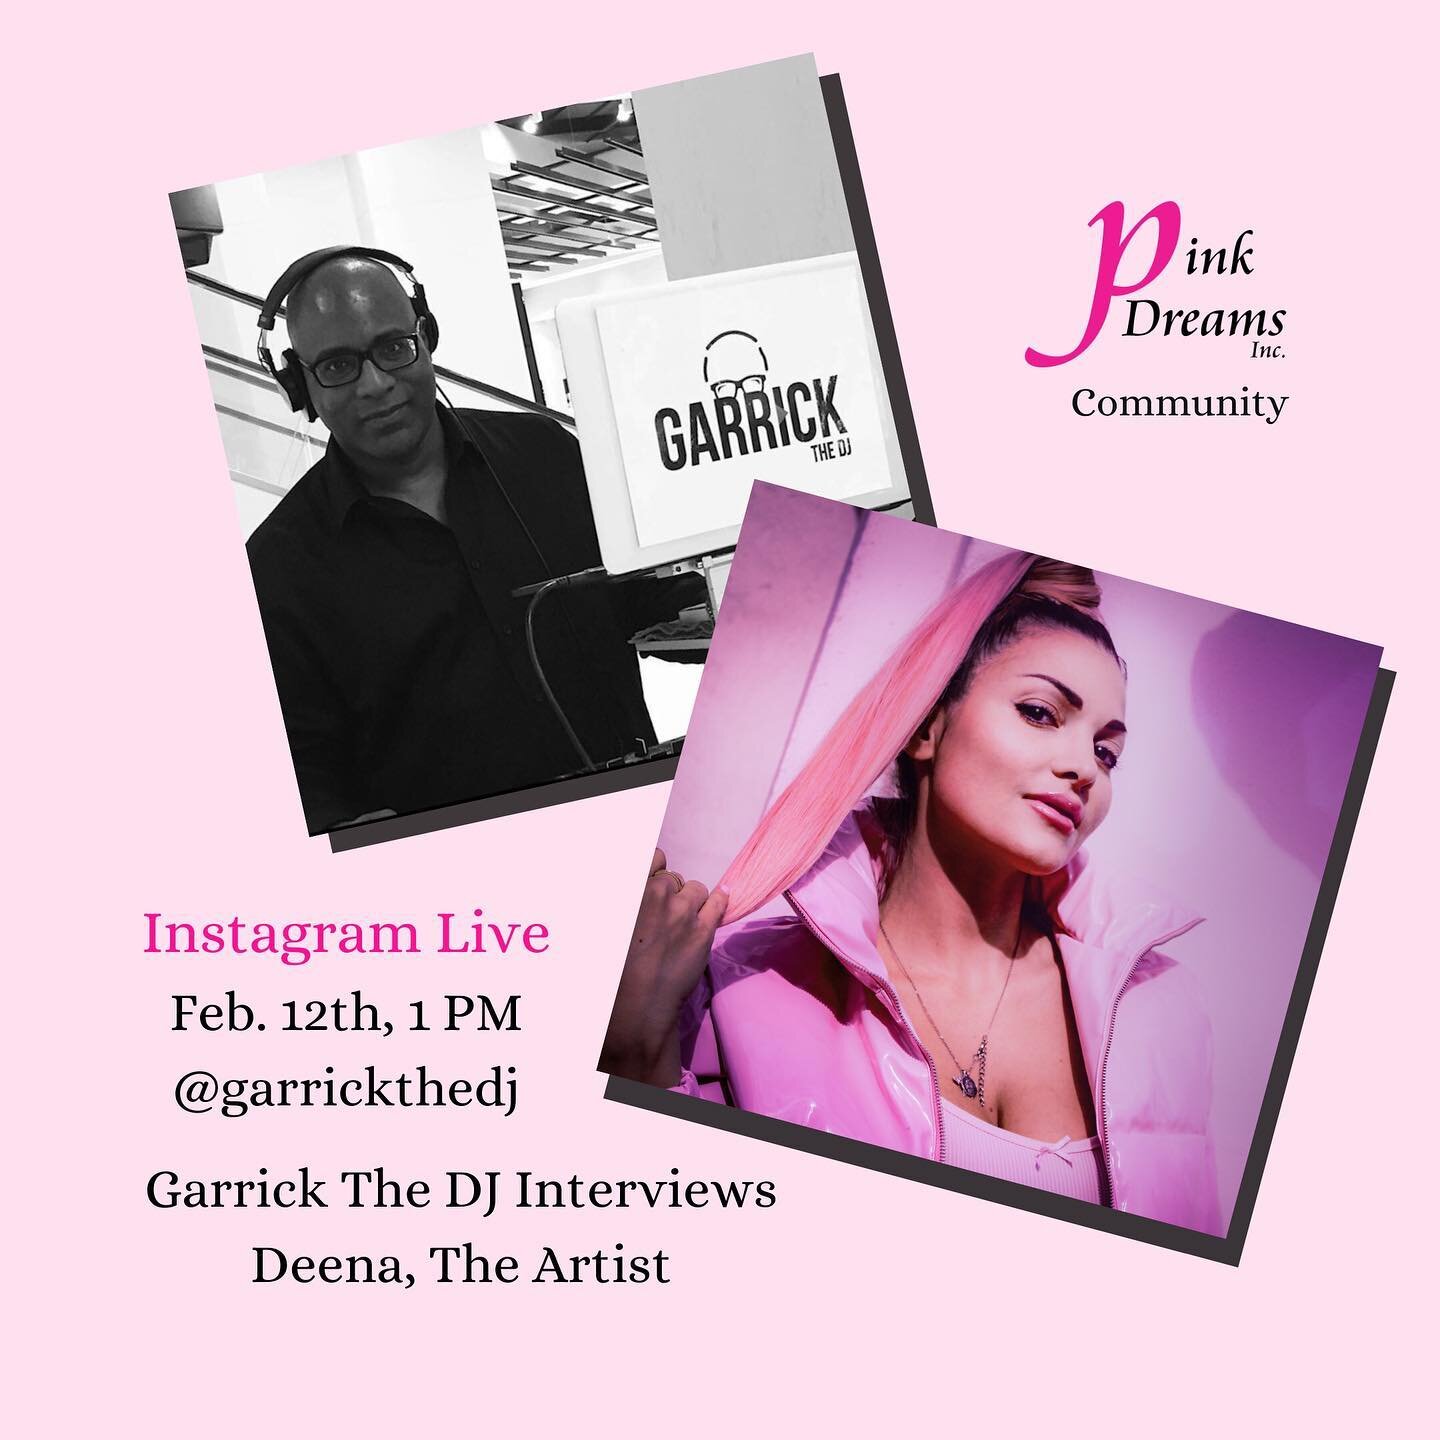 This Friday afternoon (February 12th) at 1pm ET, Join me on &ldquo;IG Live&rdquo; as I chat with Canadian Musician @deenatheodora and her new song release, &quot;I Love It When You &ldquo; which highlights the true ups and downs of a relationship and